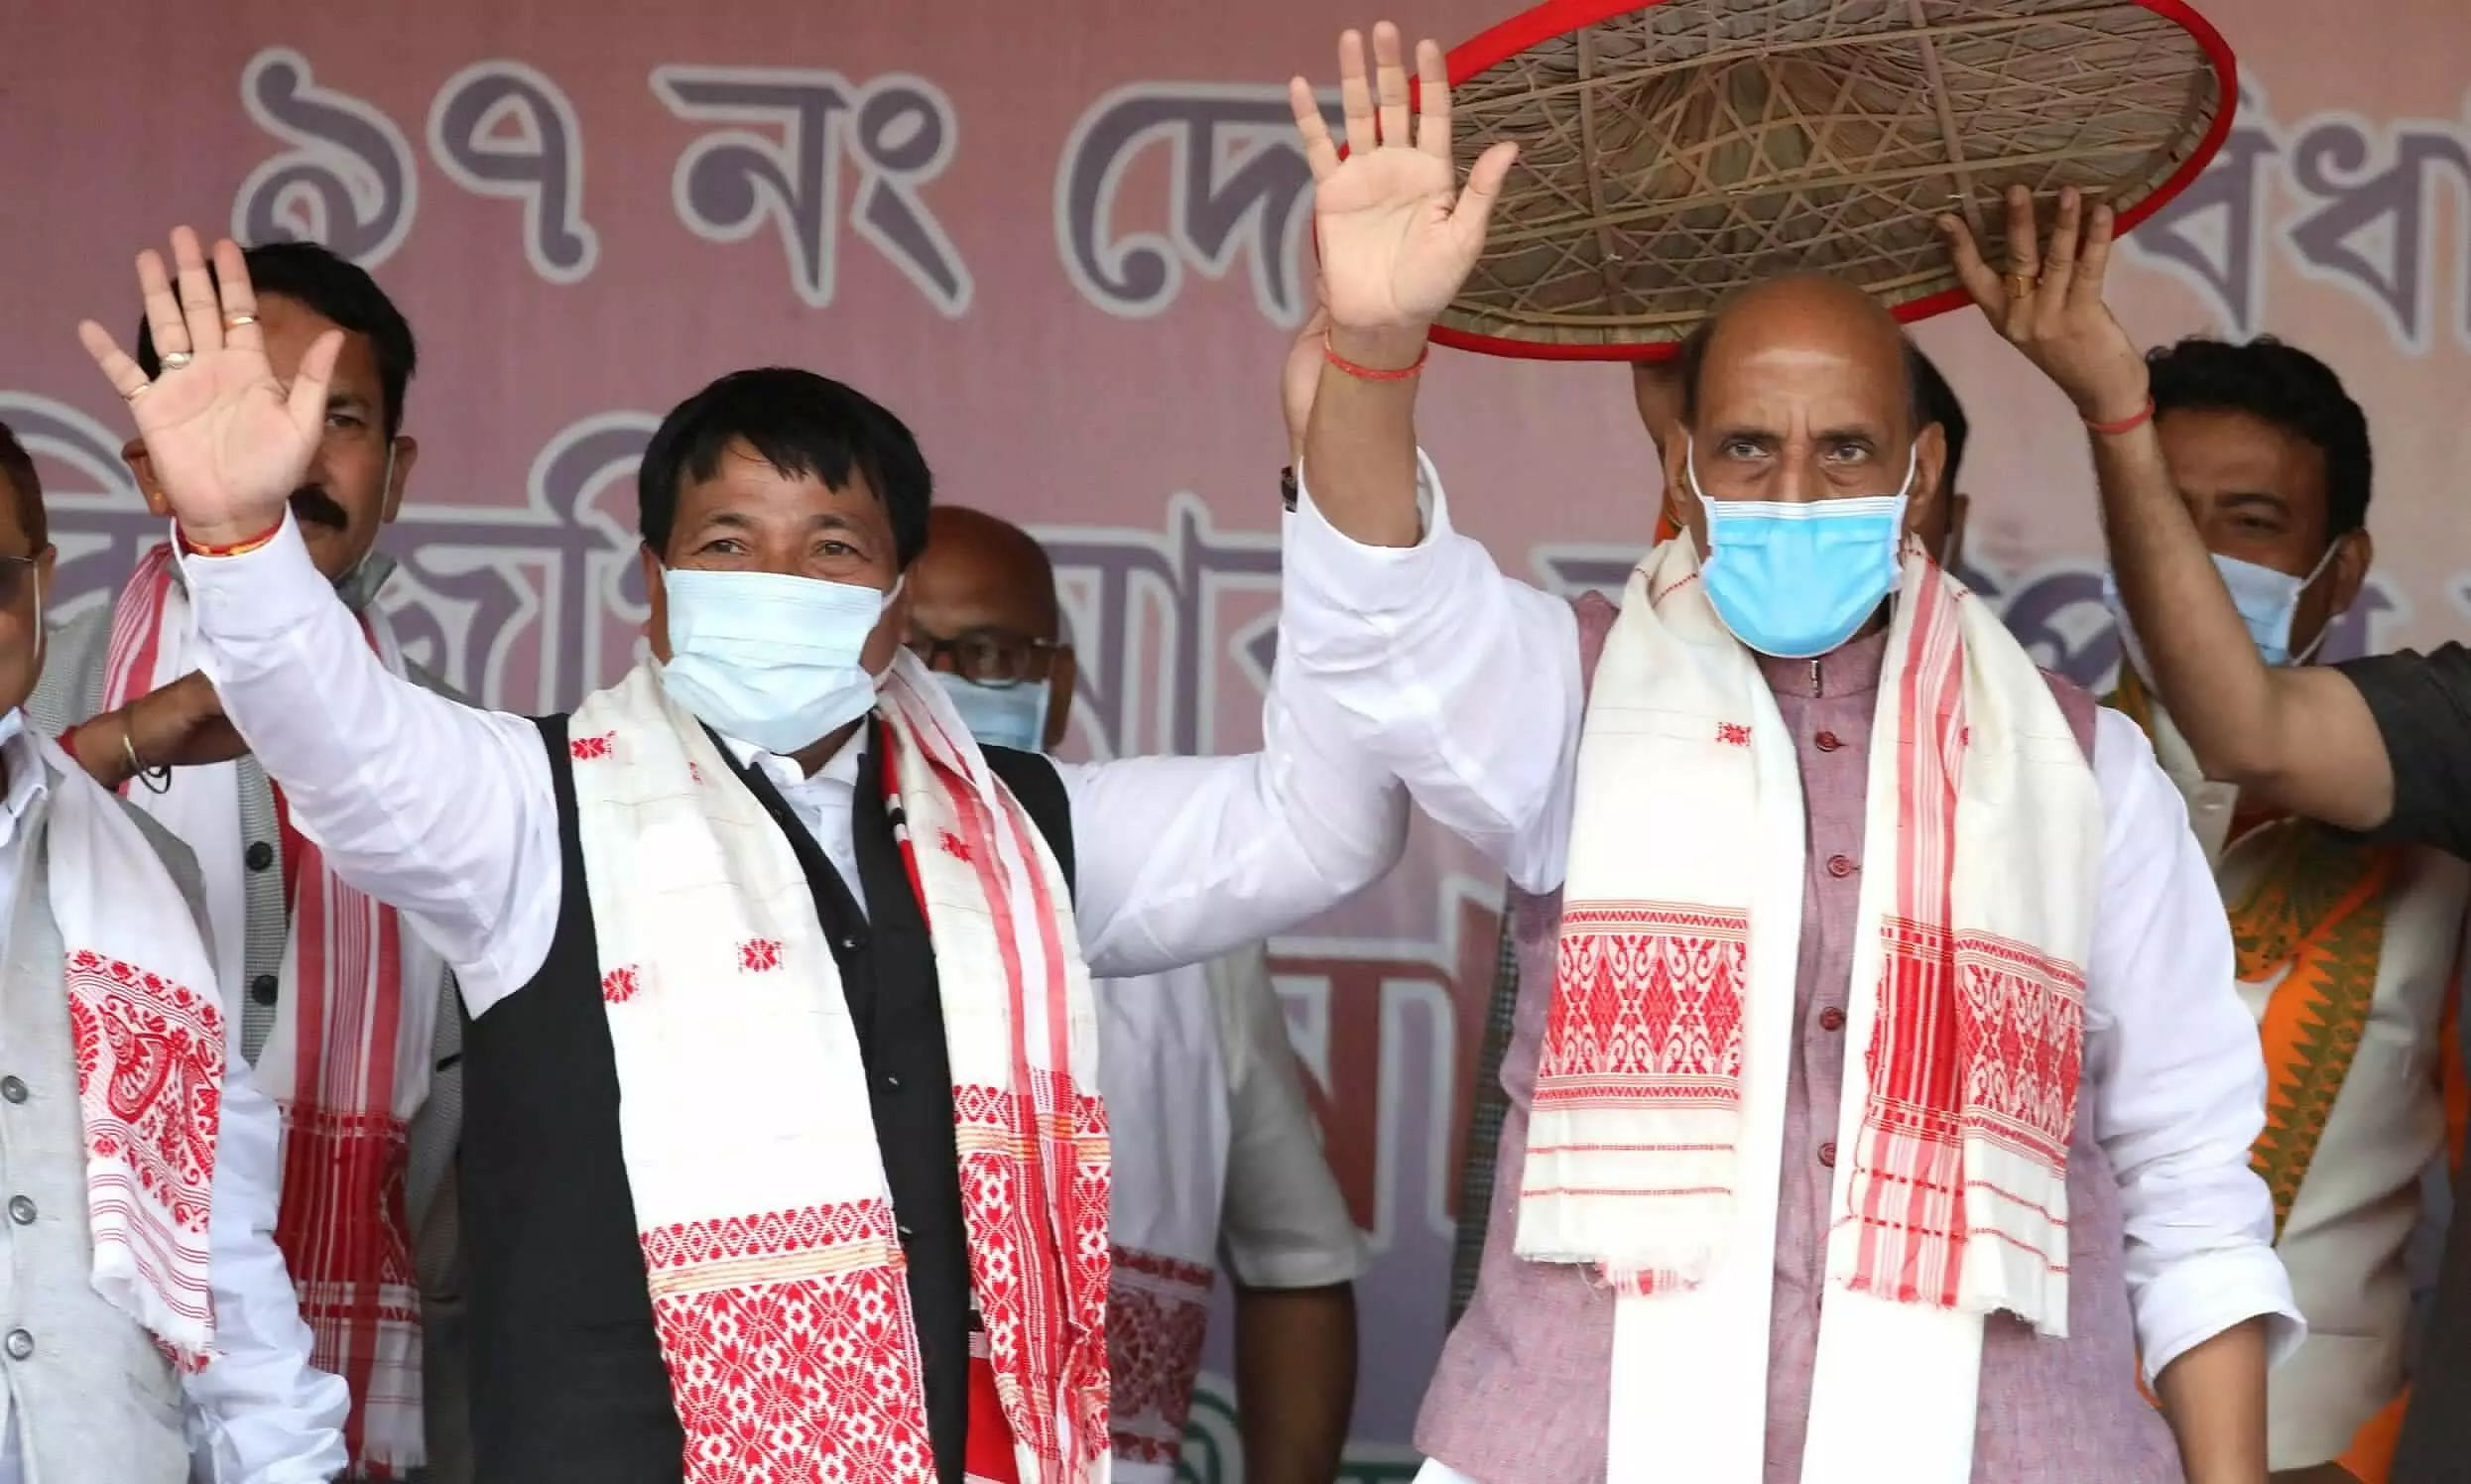 Development picked up in Assam as terrorism tamed, says Rajnath Singh